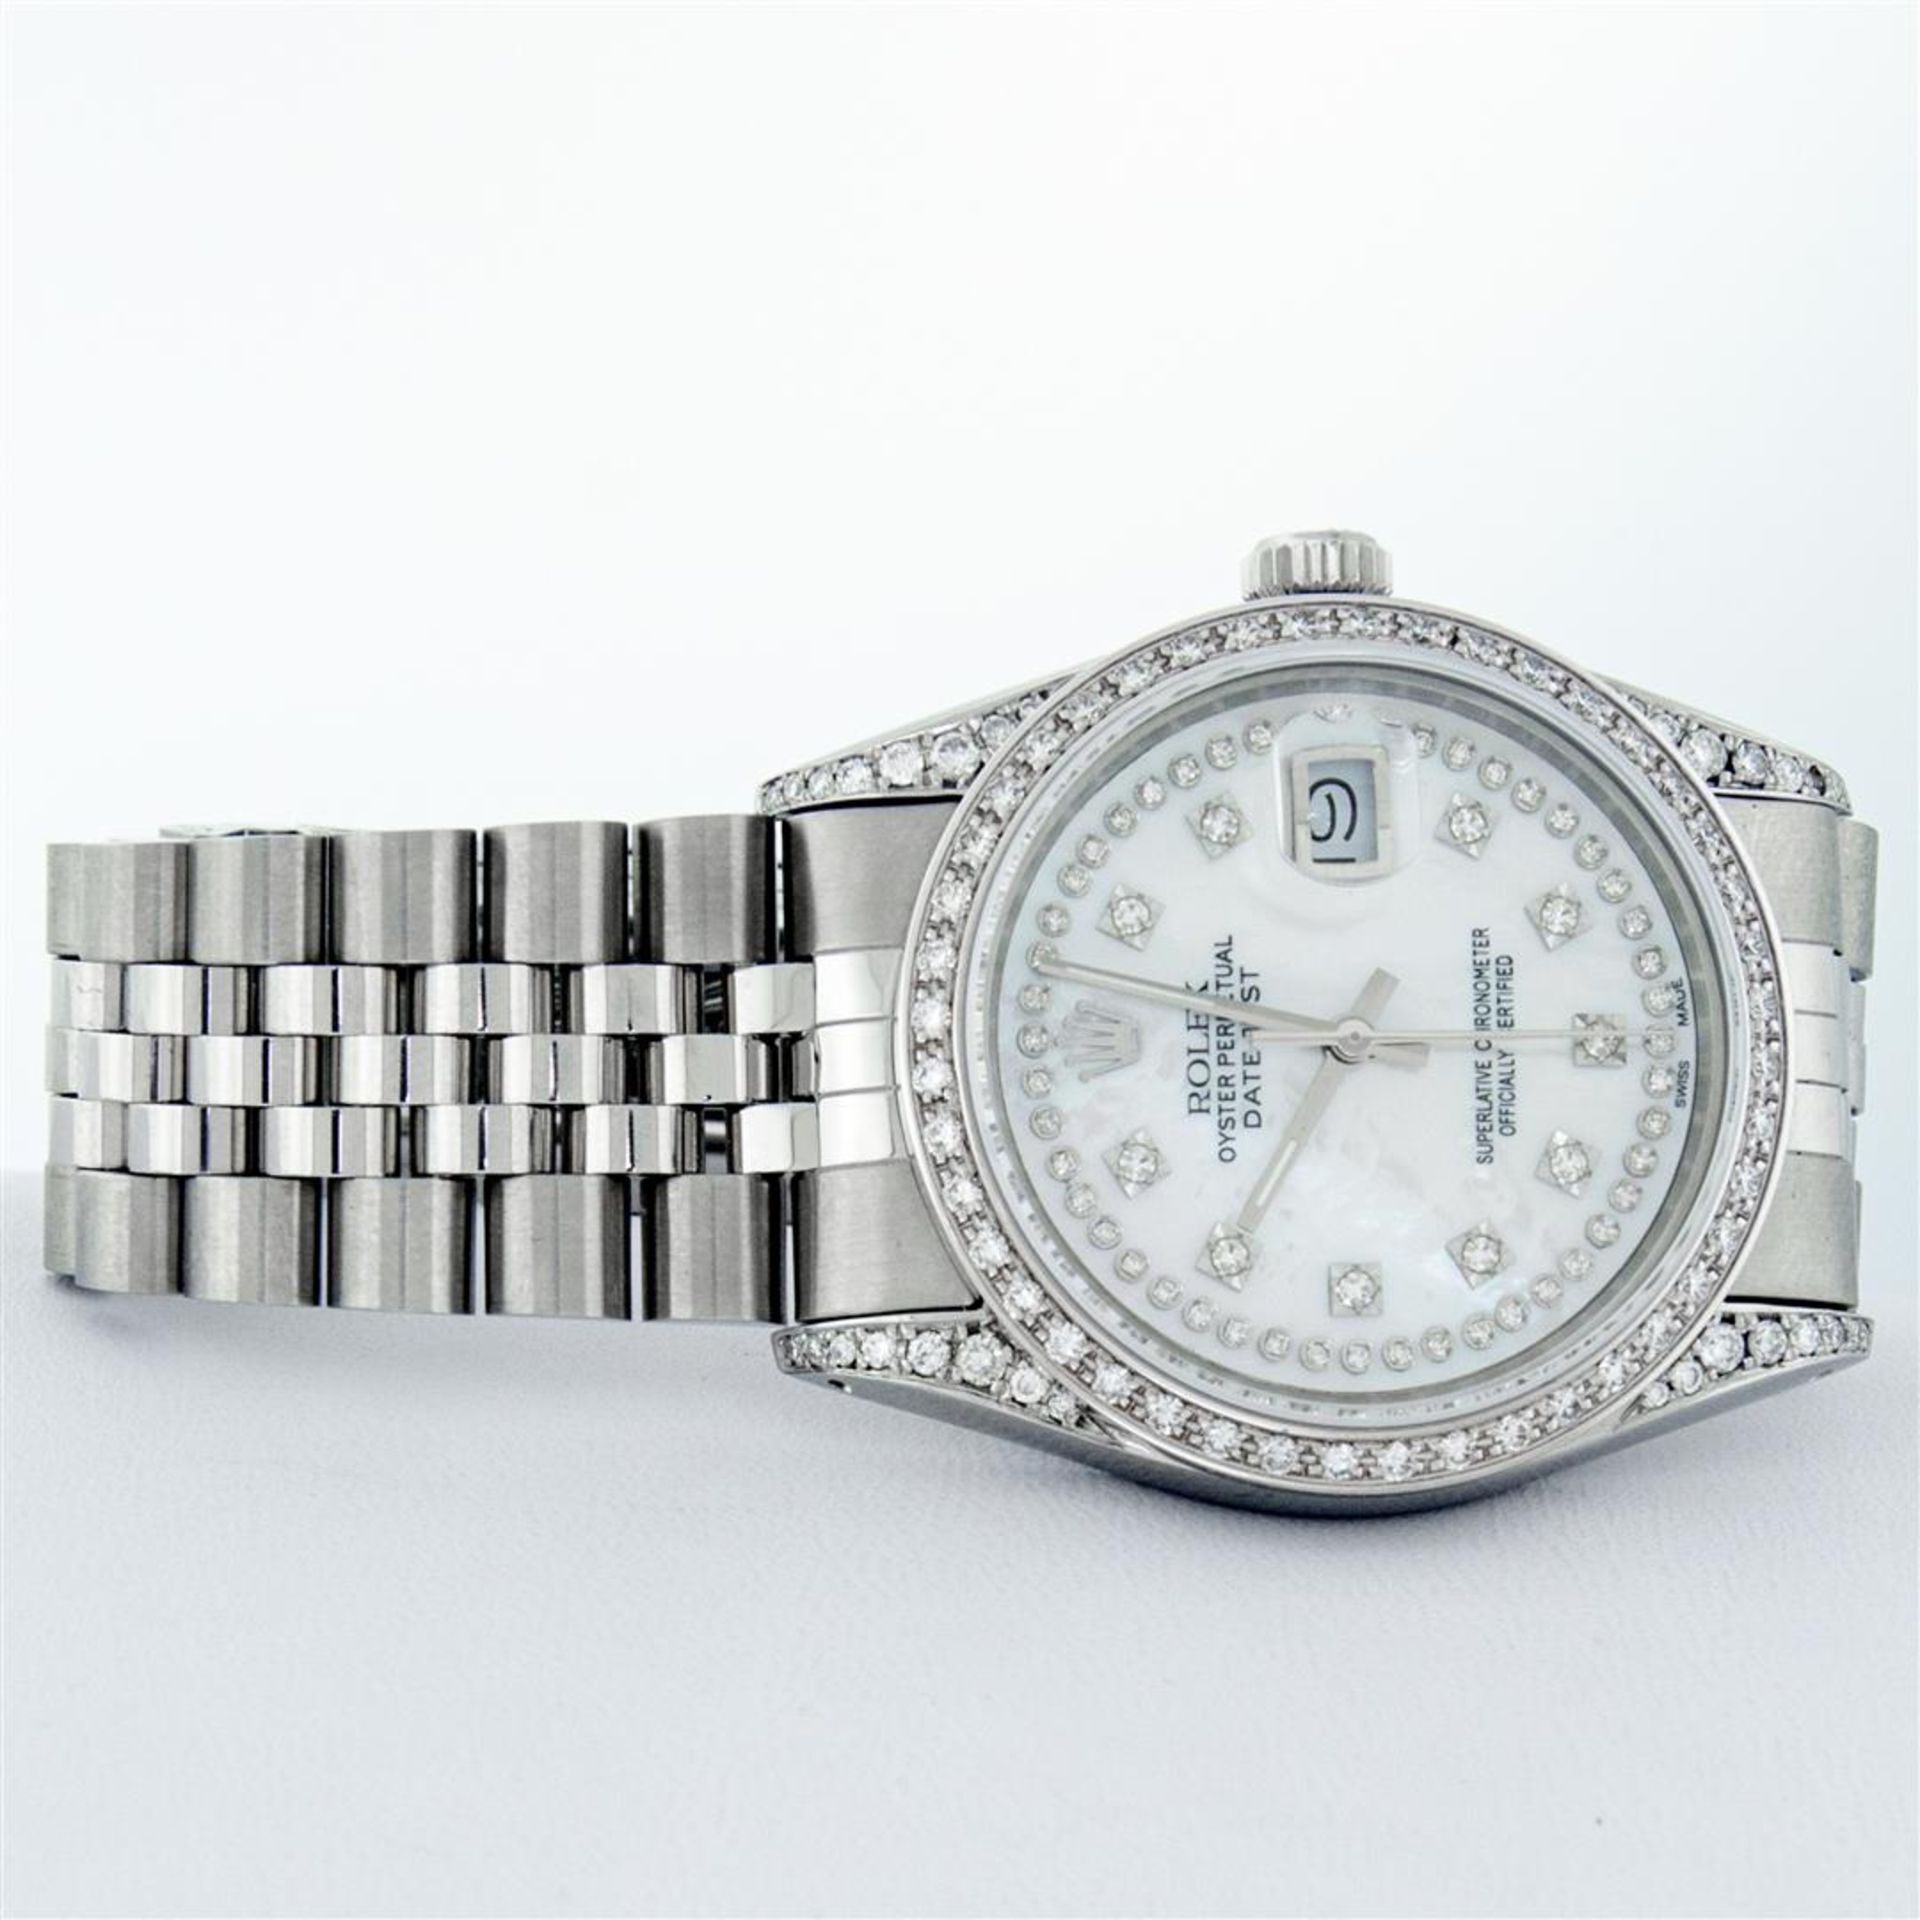 Rolex Mens Stainless Steel Mother Of Pearl Diamond Lugs Datejust Wristwatch - Image 5 of 9